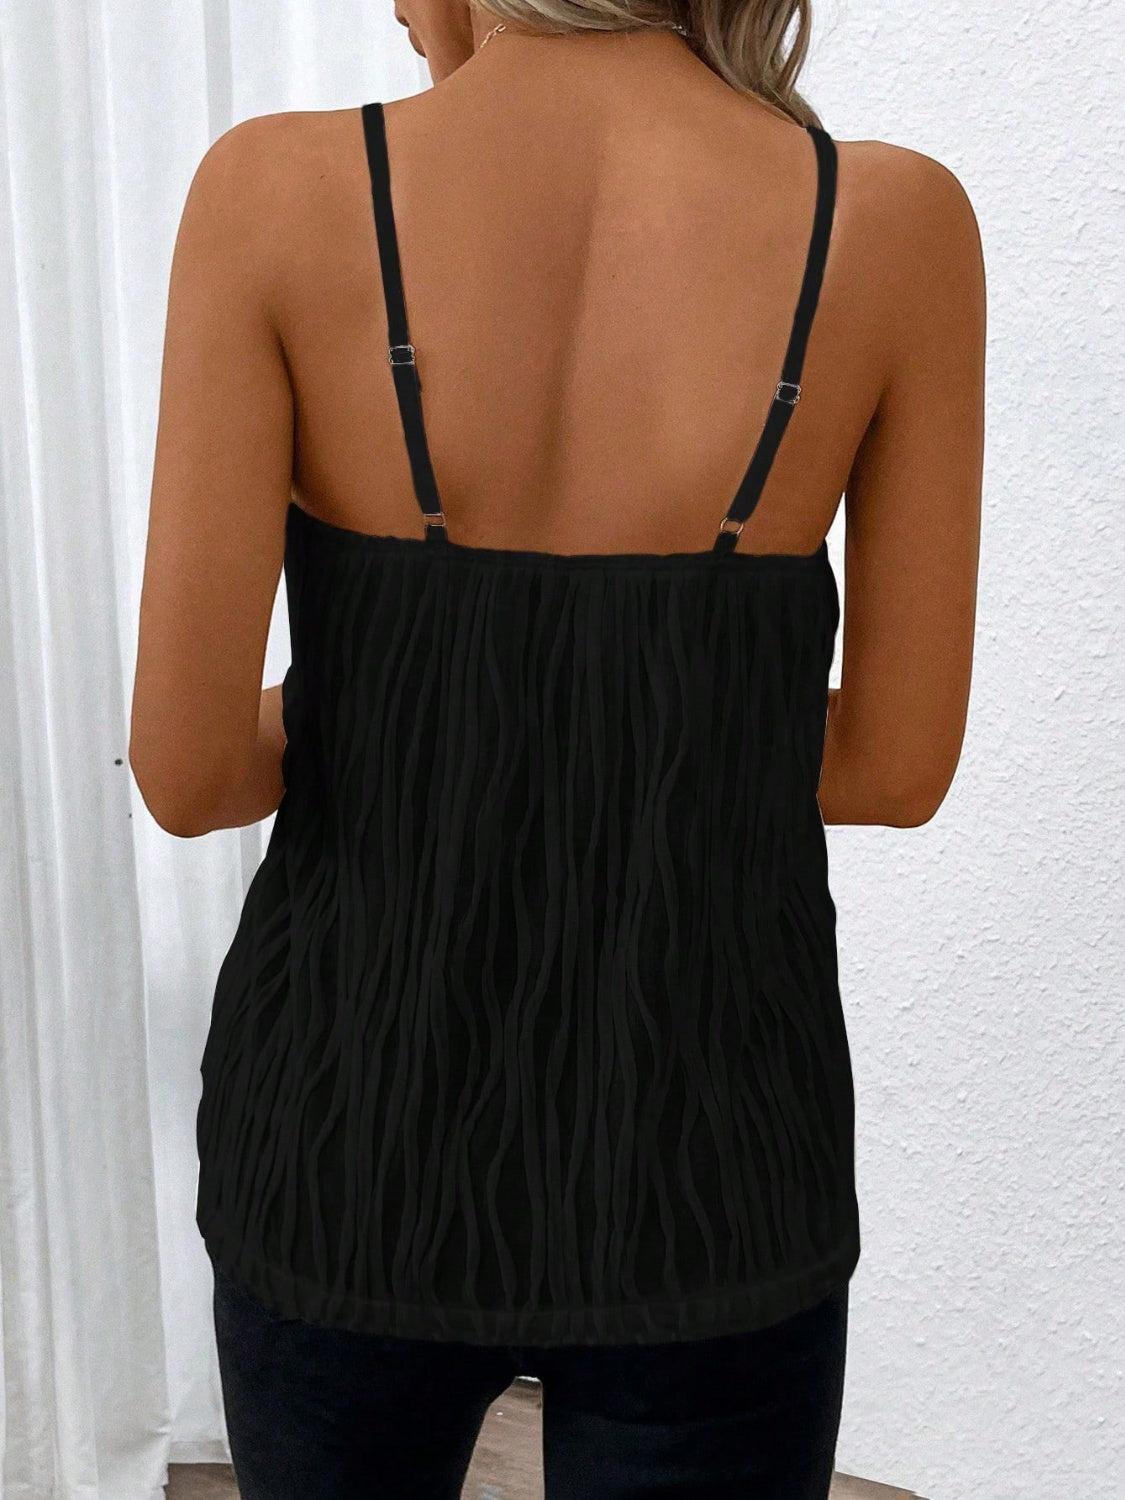 the back of a woman wearing a black top